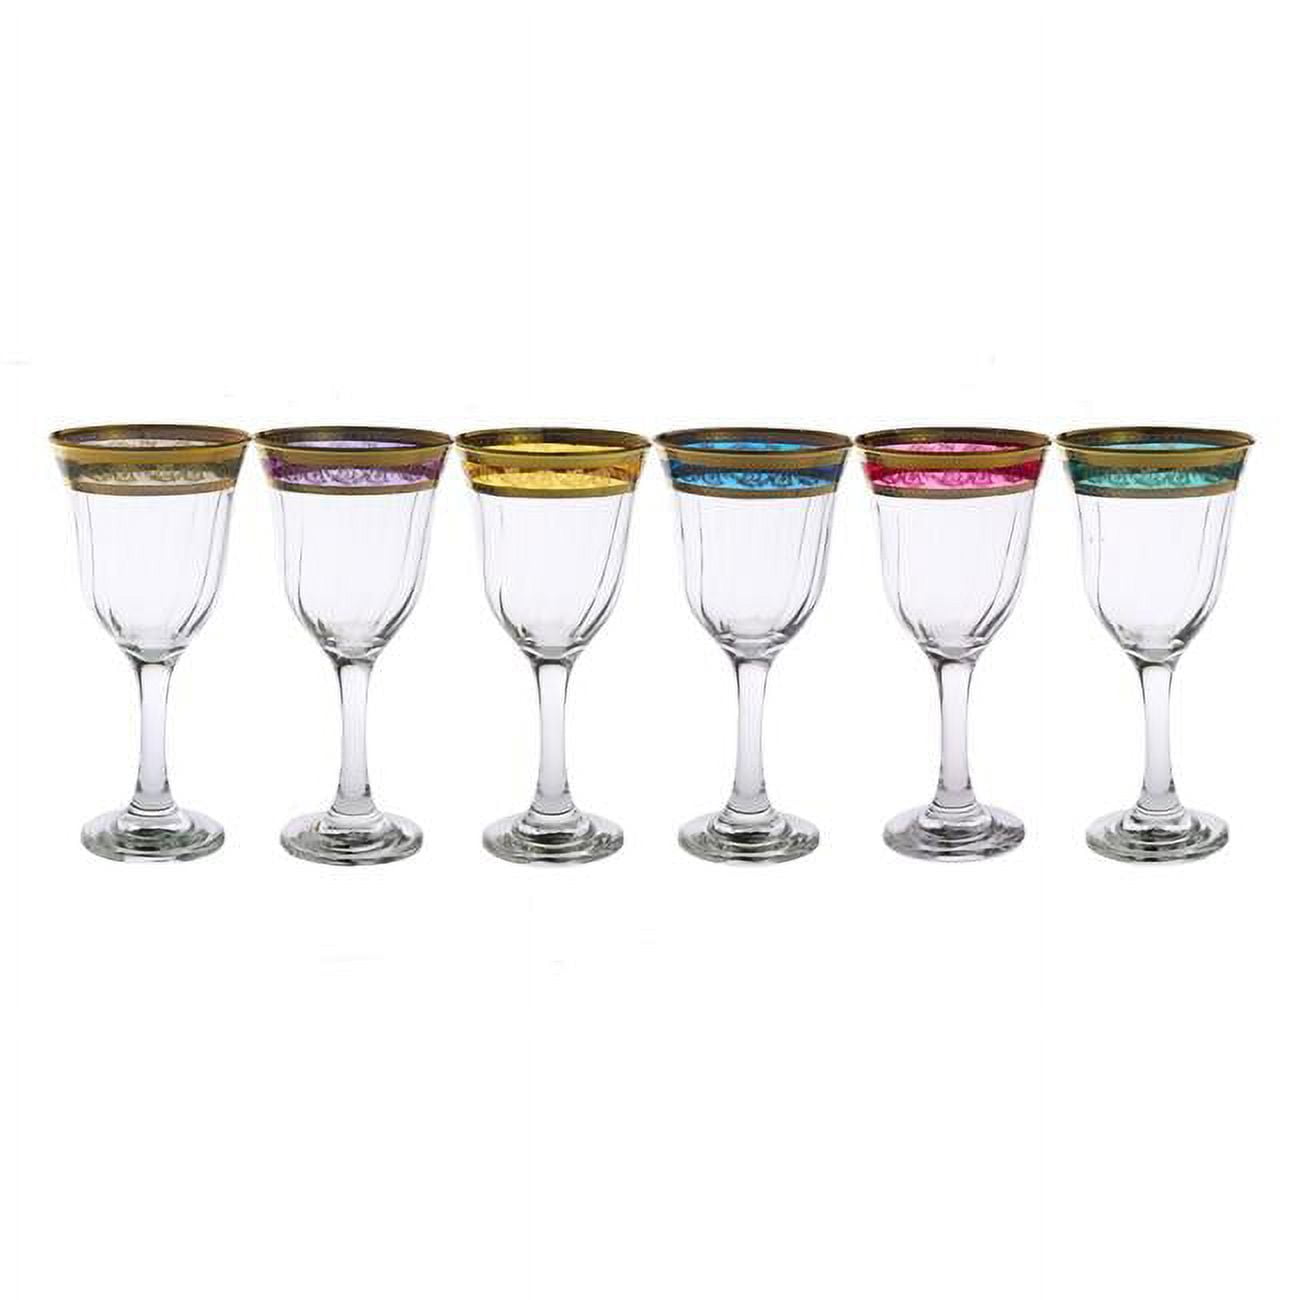 Classic Touch Cwgm642 3.75 X 8 In. Assorted Colored Water Glasses With Gold Design, Set Of 6